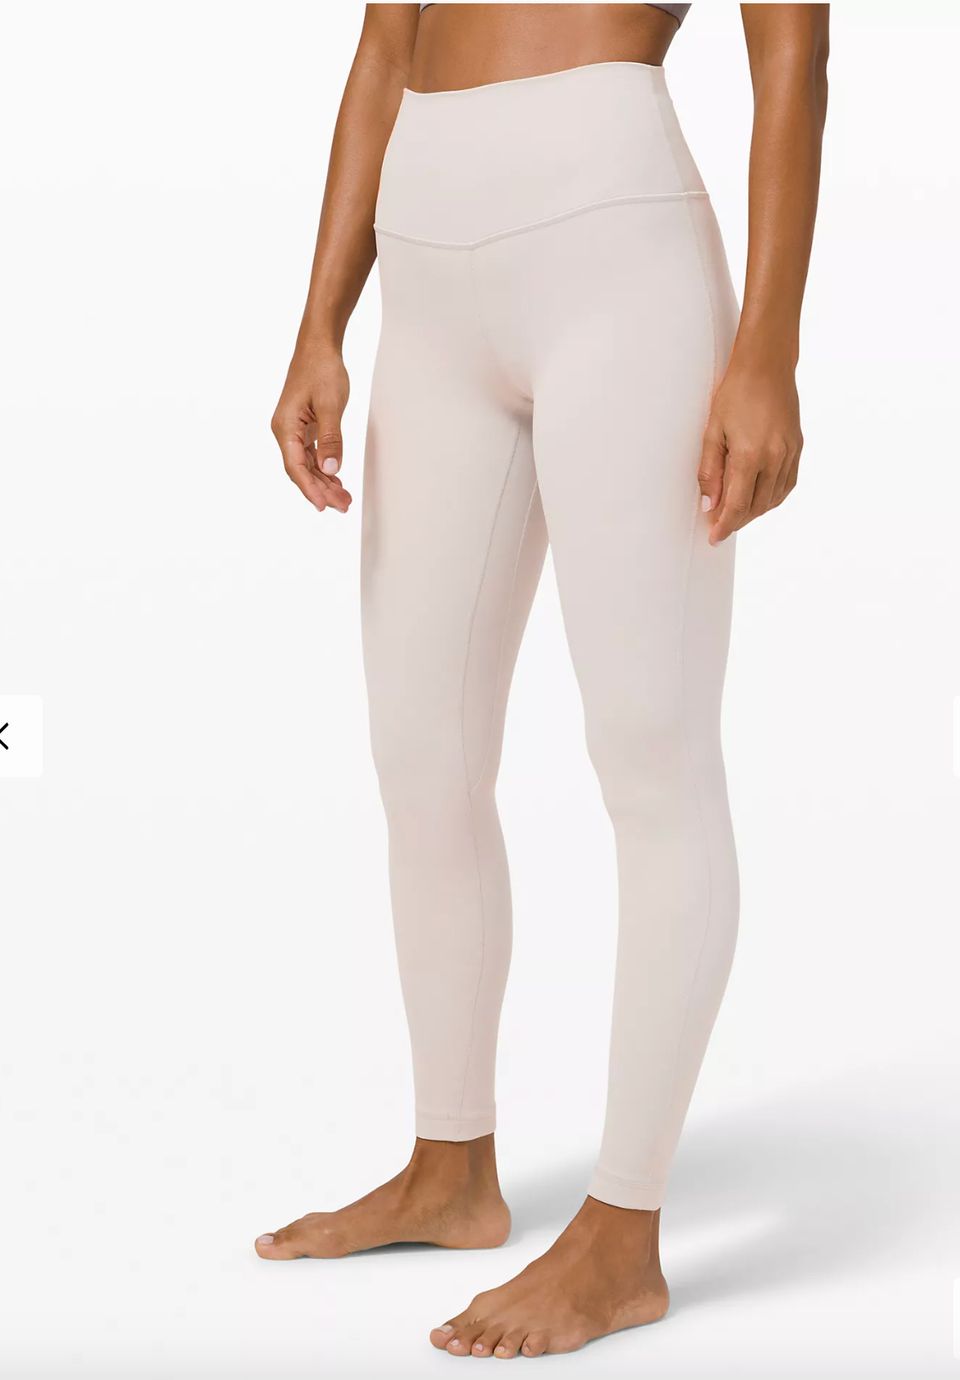 Aerie Chill high waisted legging review: Are they better than